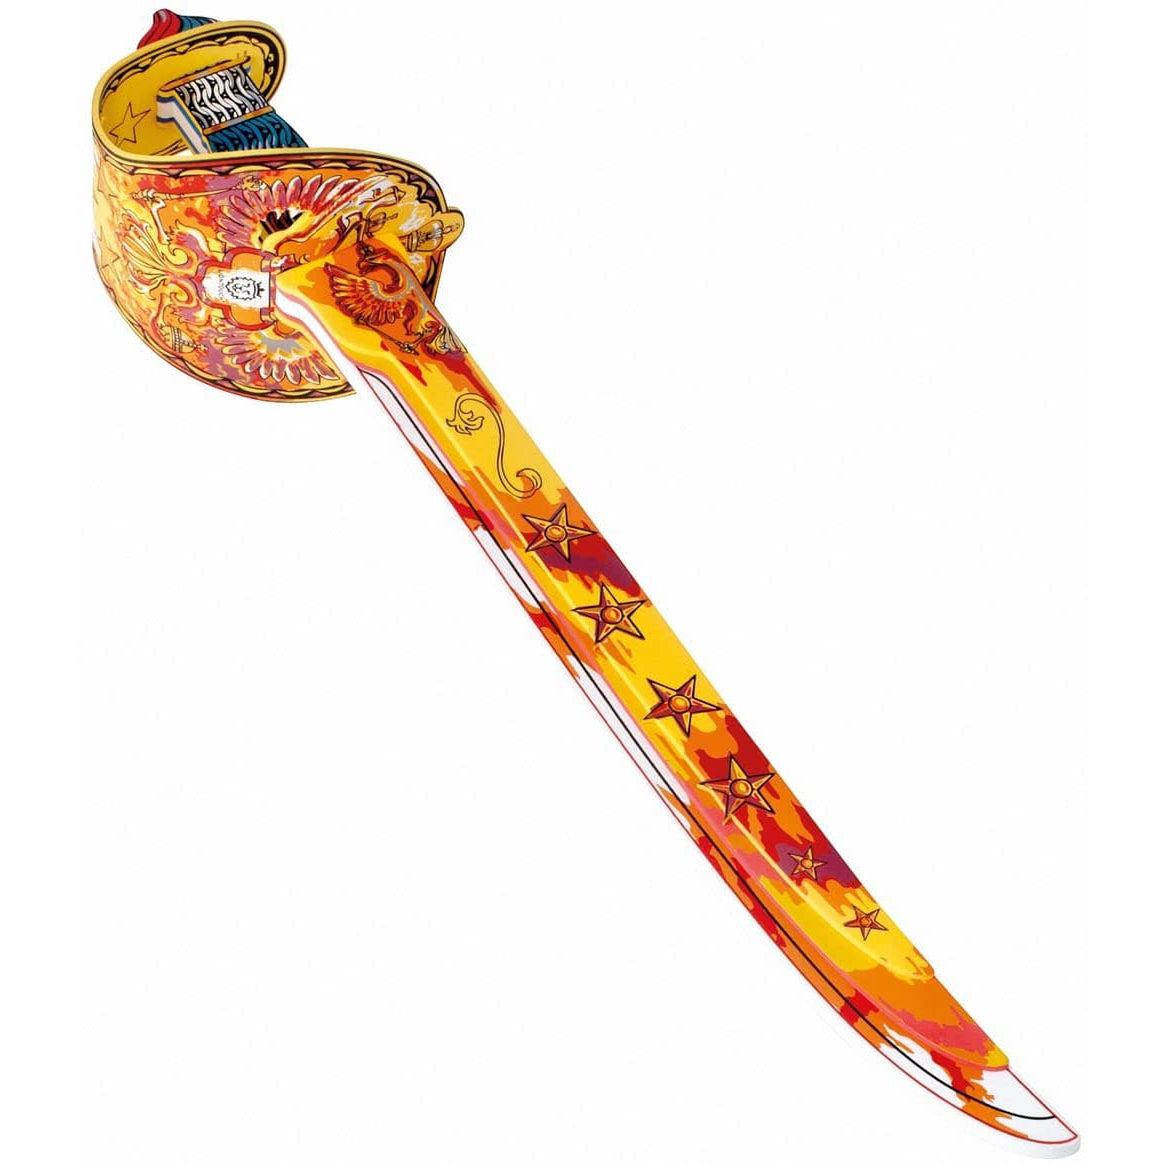 Liontouch-Liontouch Fantasy Flame Sabre-18504-Legacy Toys